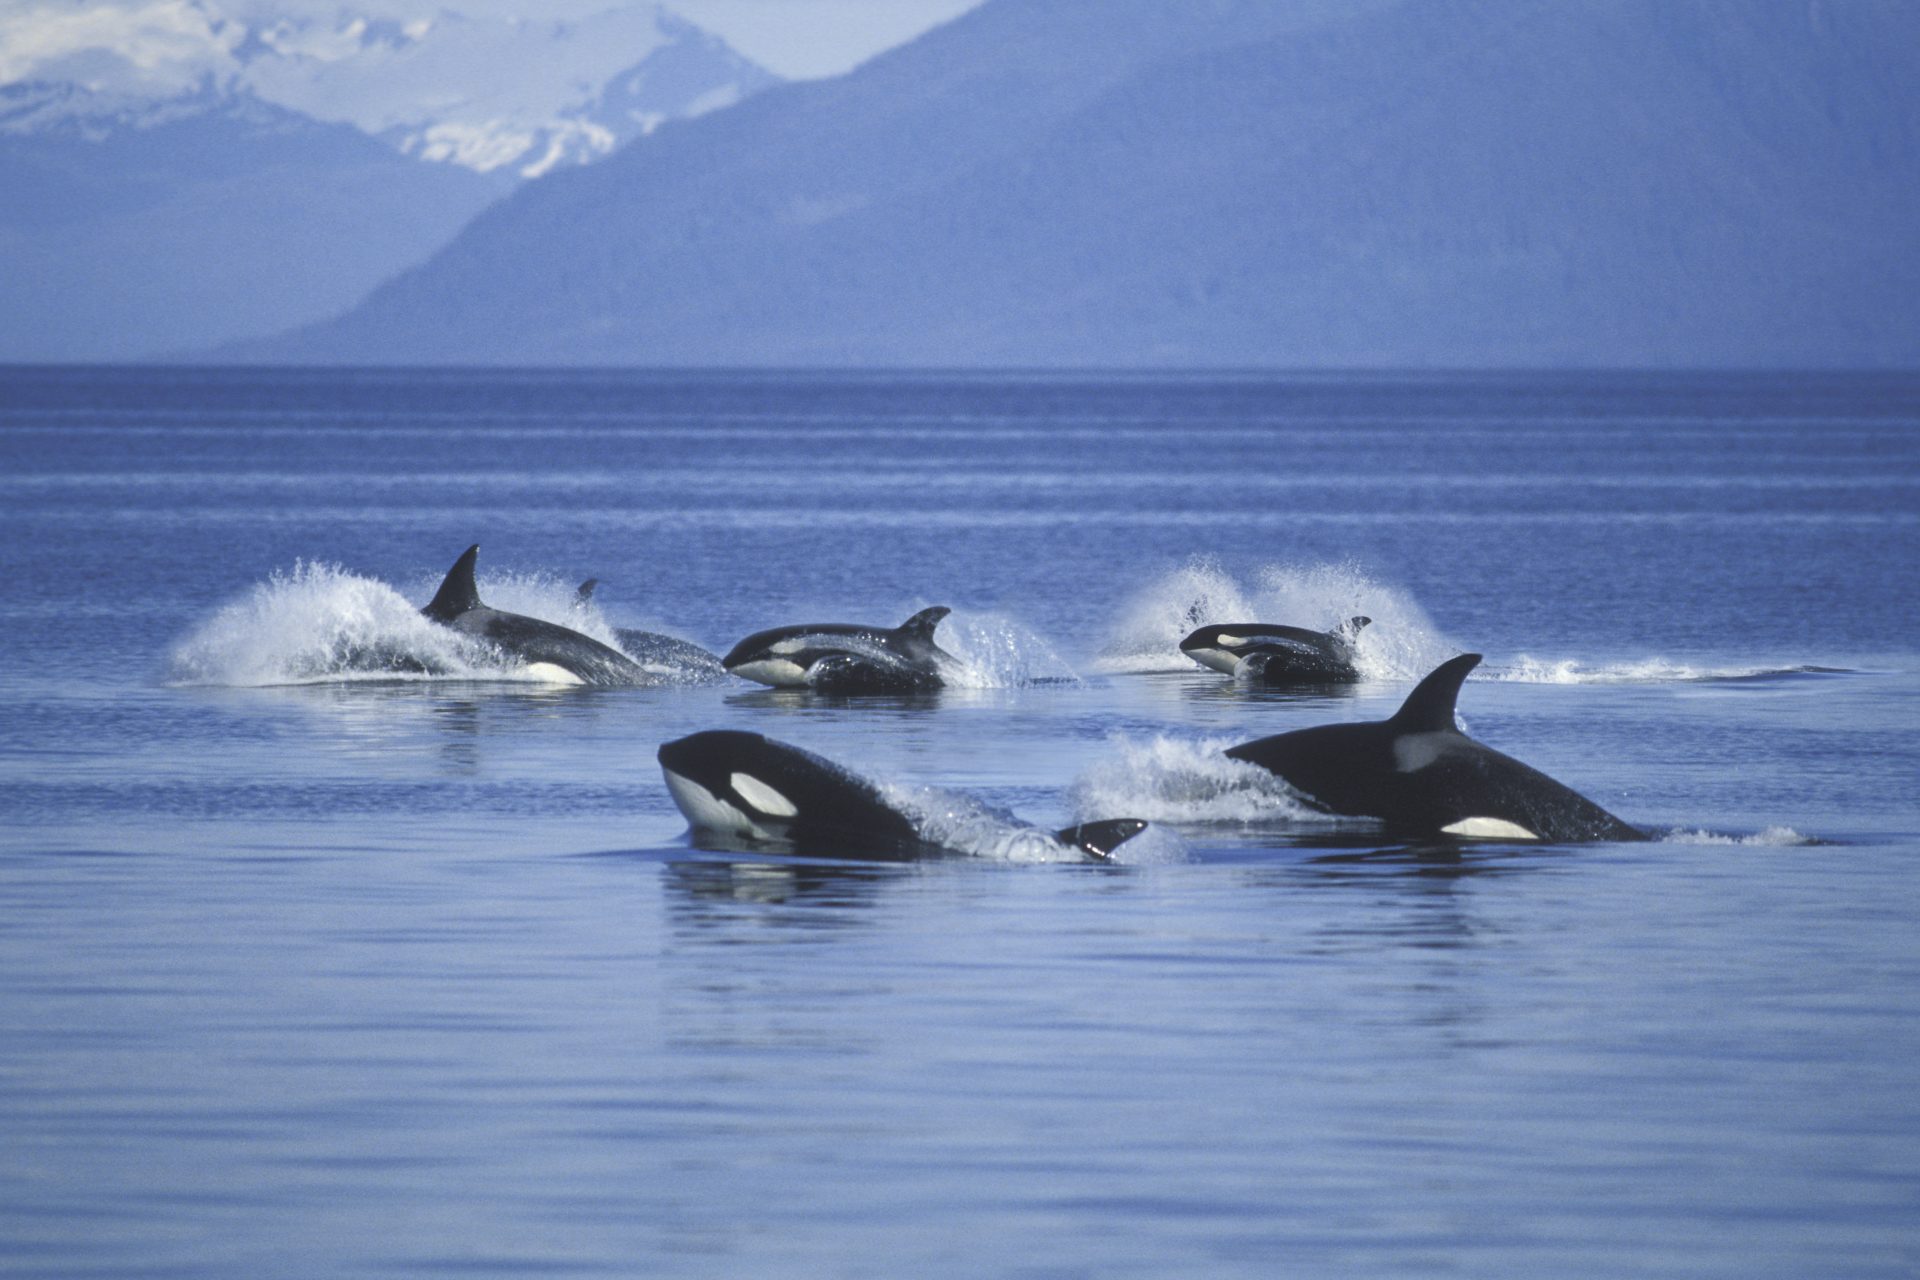 <p>Such aquatic violence has puzzled scientists, who have undergone multiple studies to try and understand the behavioral patterns of the ocean's top apex predator. According to Live Science, many scientists believe the attacks stem from a traumatized orca, seeking 'revenge'.</p>